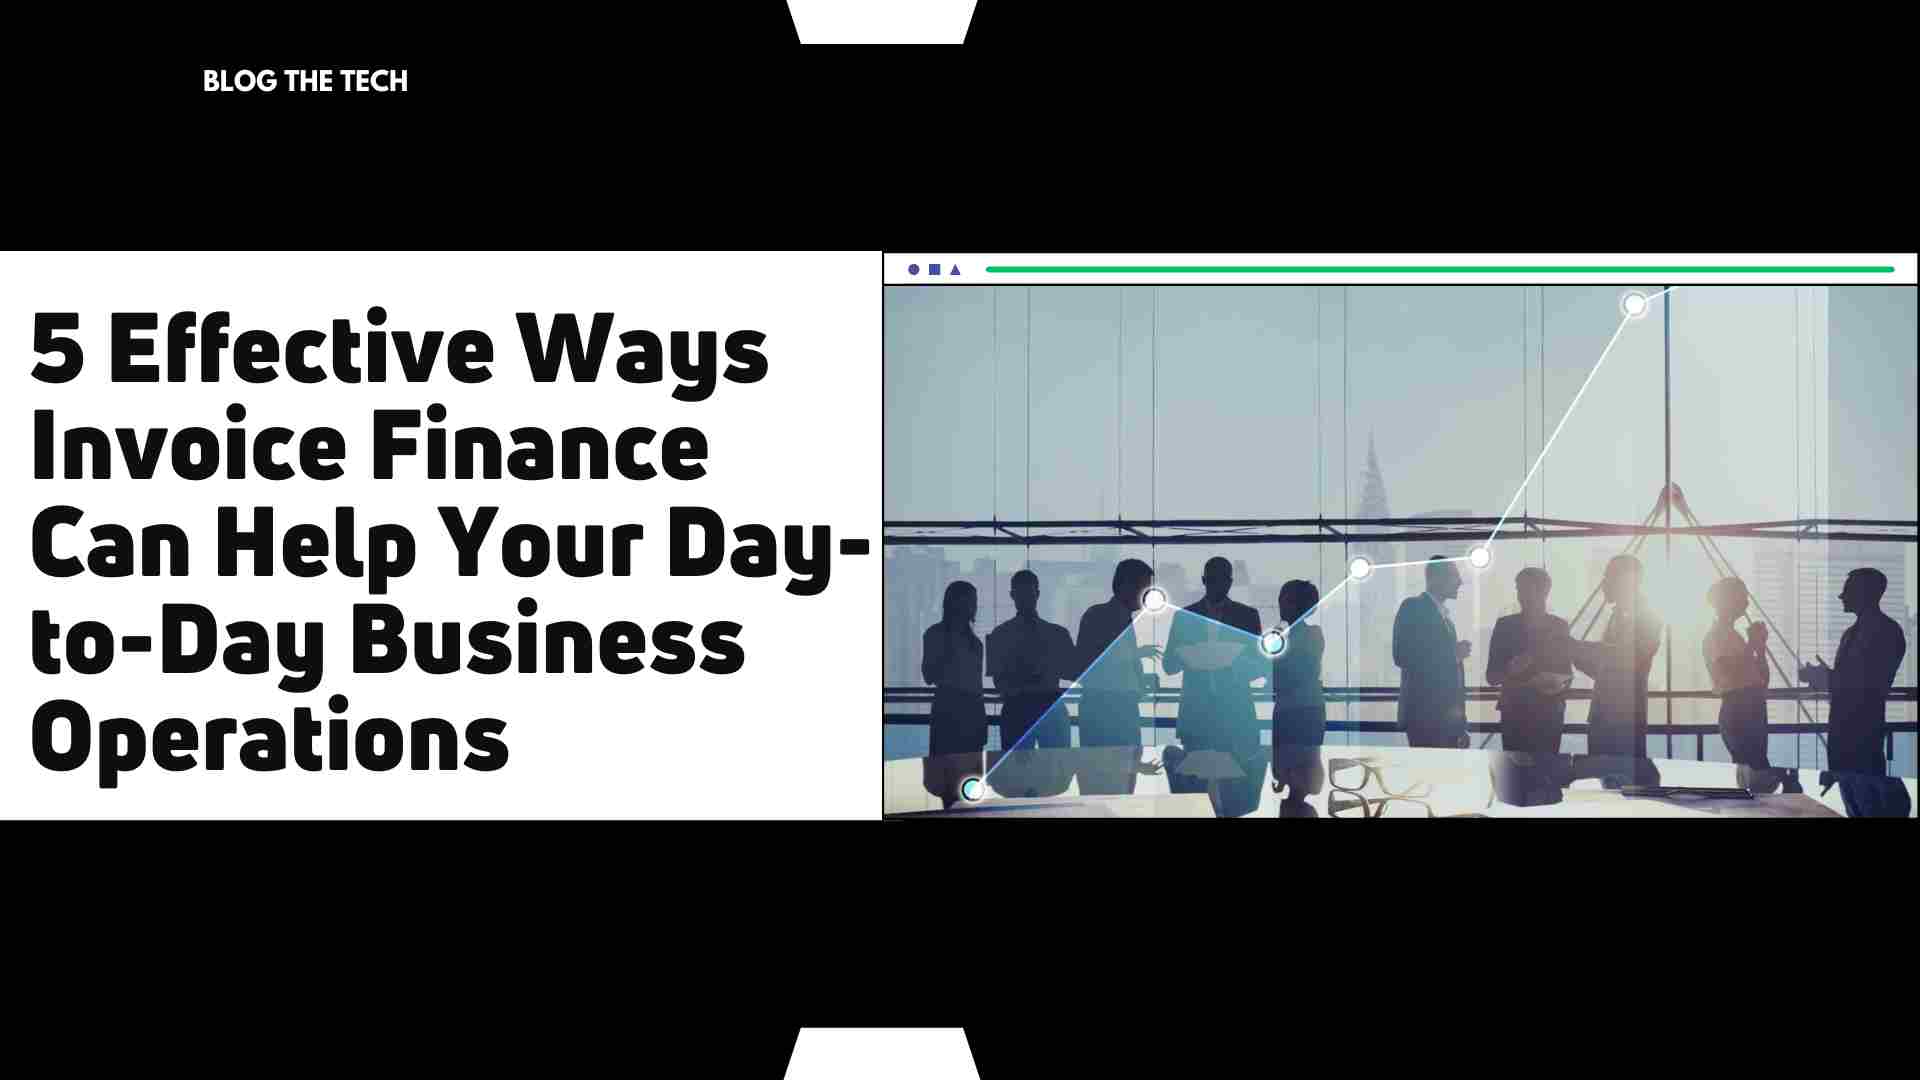 5 Effective Ways Invoice Finance Can Help Your Day-to-Day Business Operations